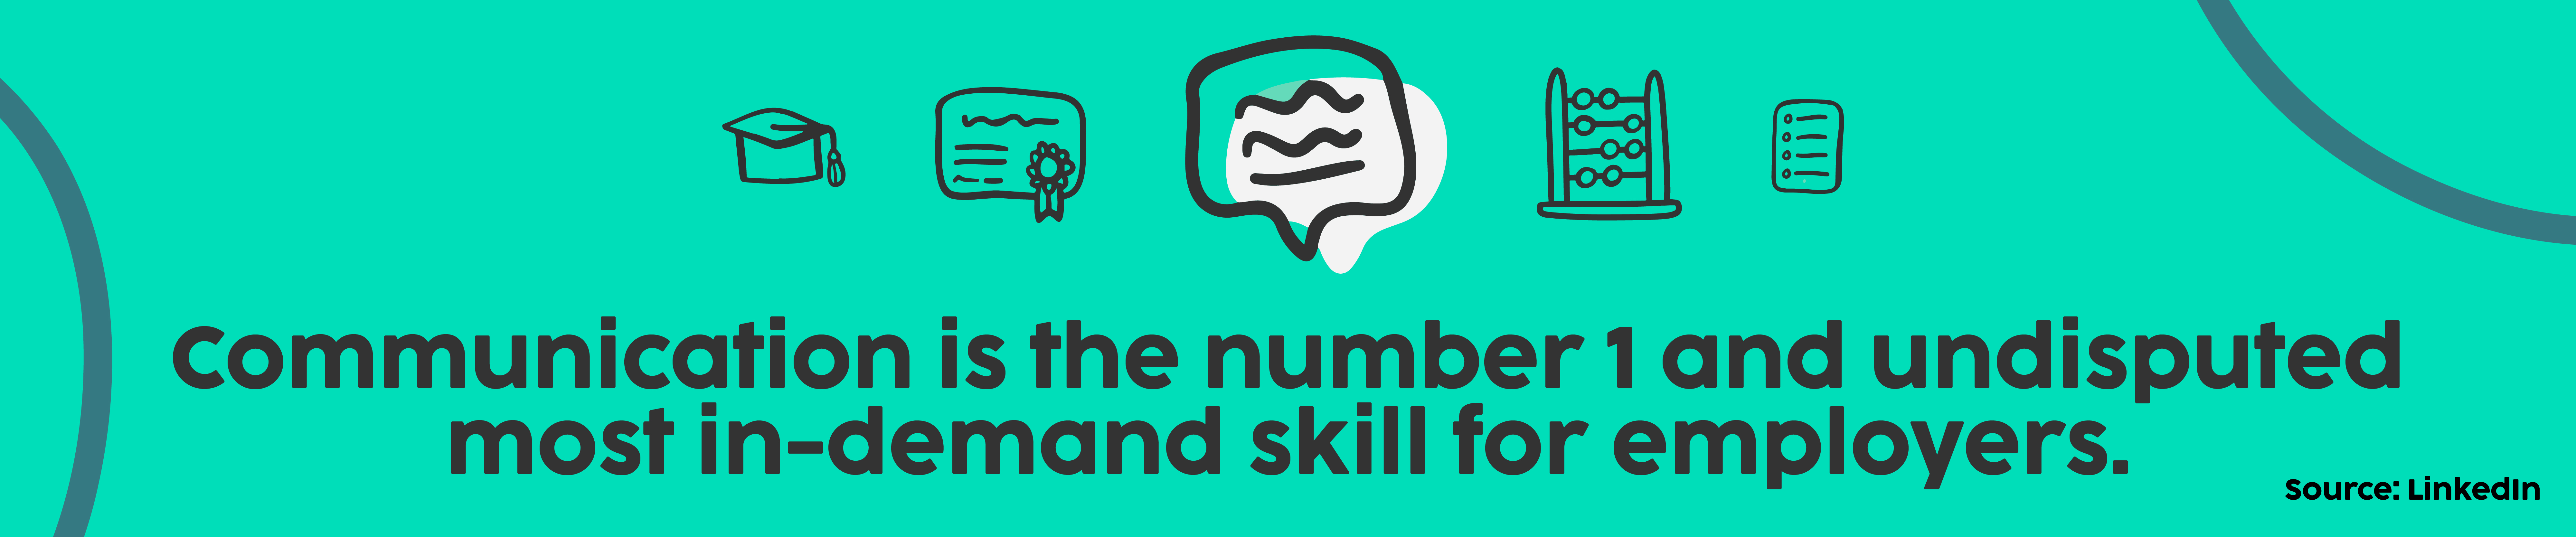 Communication is the number 1 and undisputed most in-demand skill for employers.